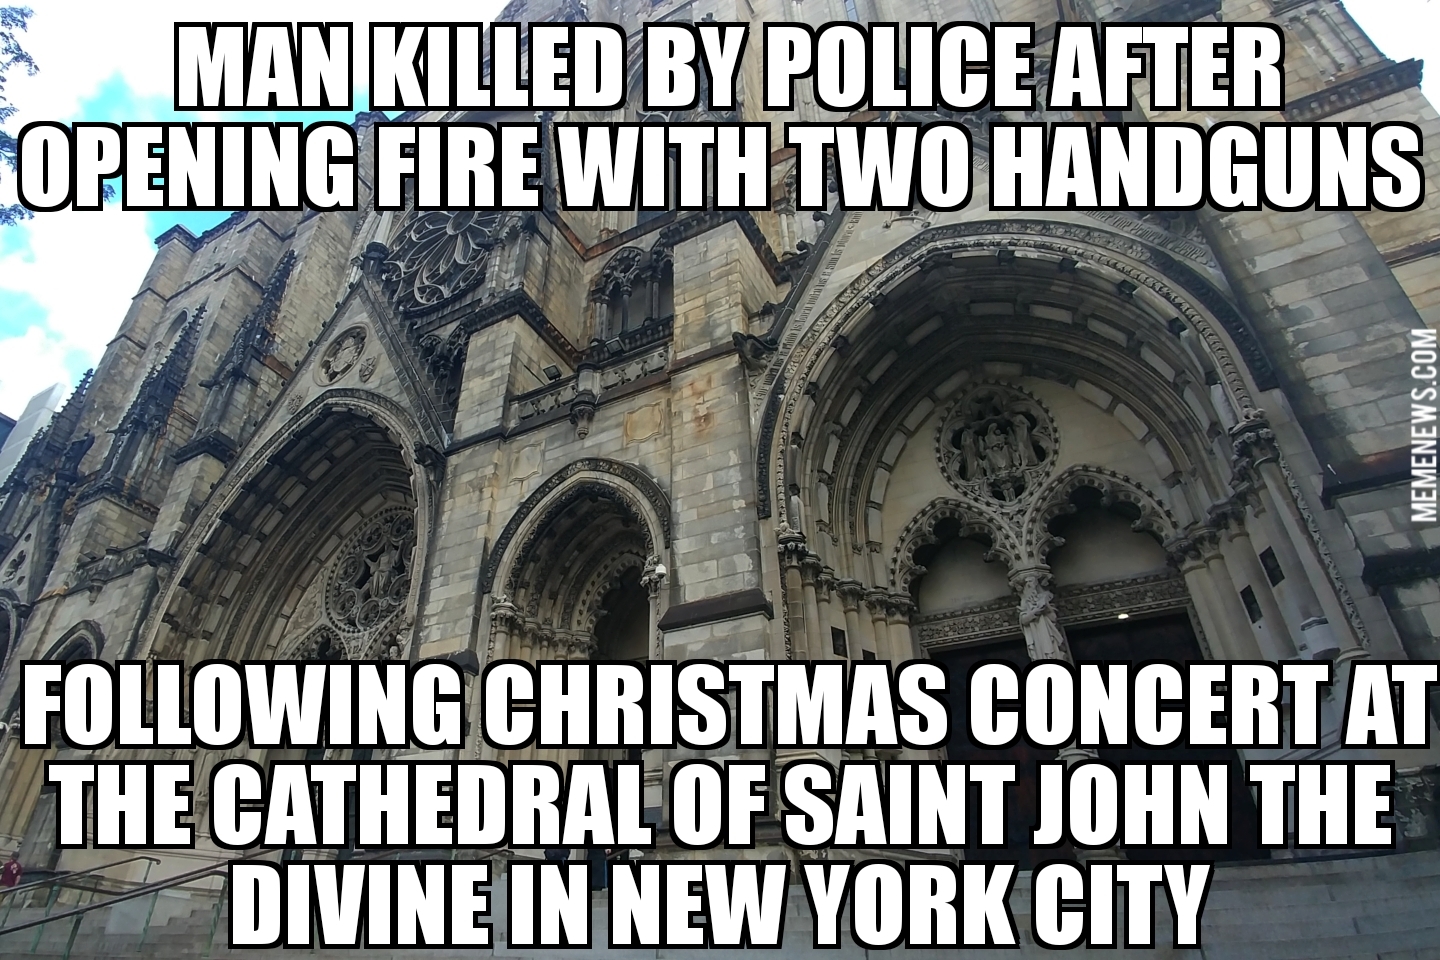 Shooting at the Cathedral of Saint John the Divine